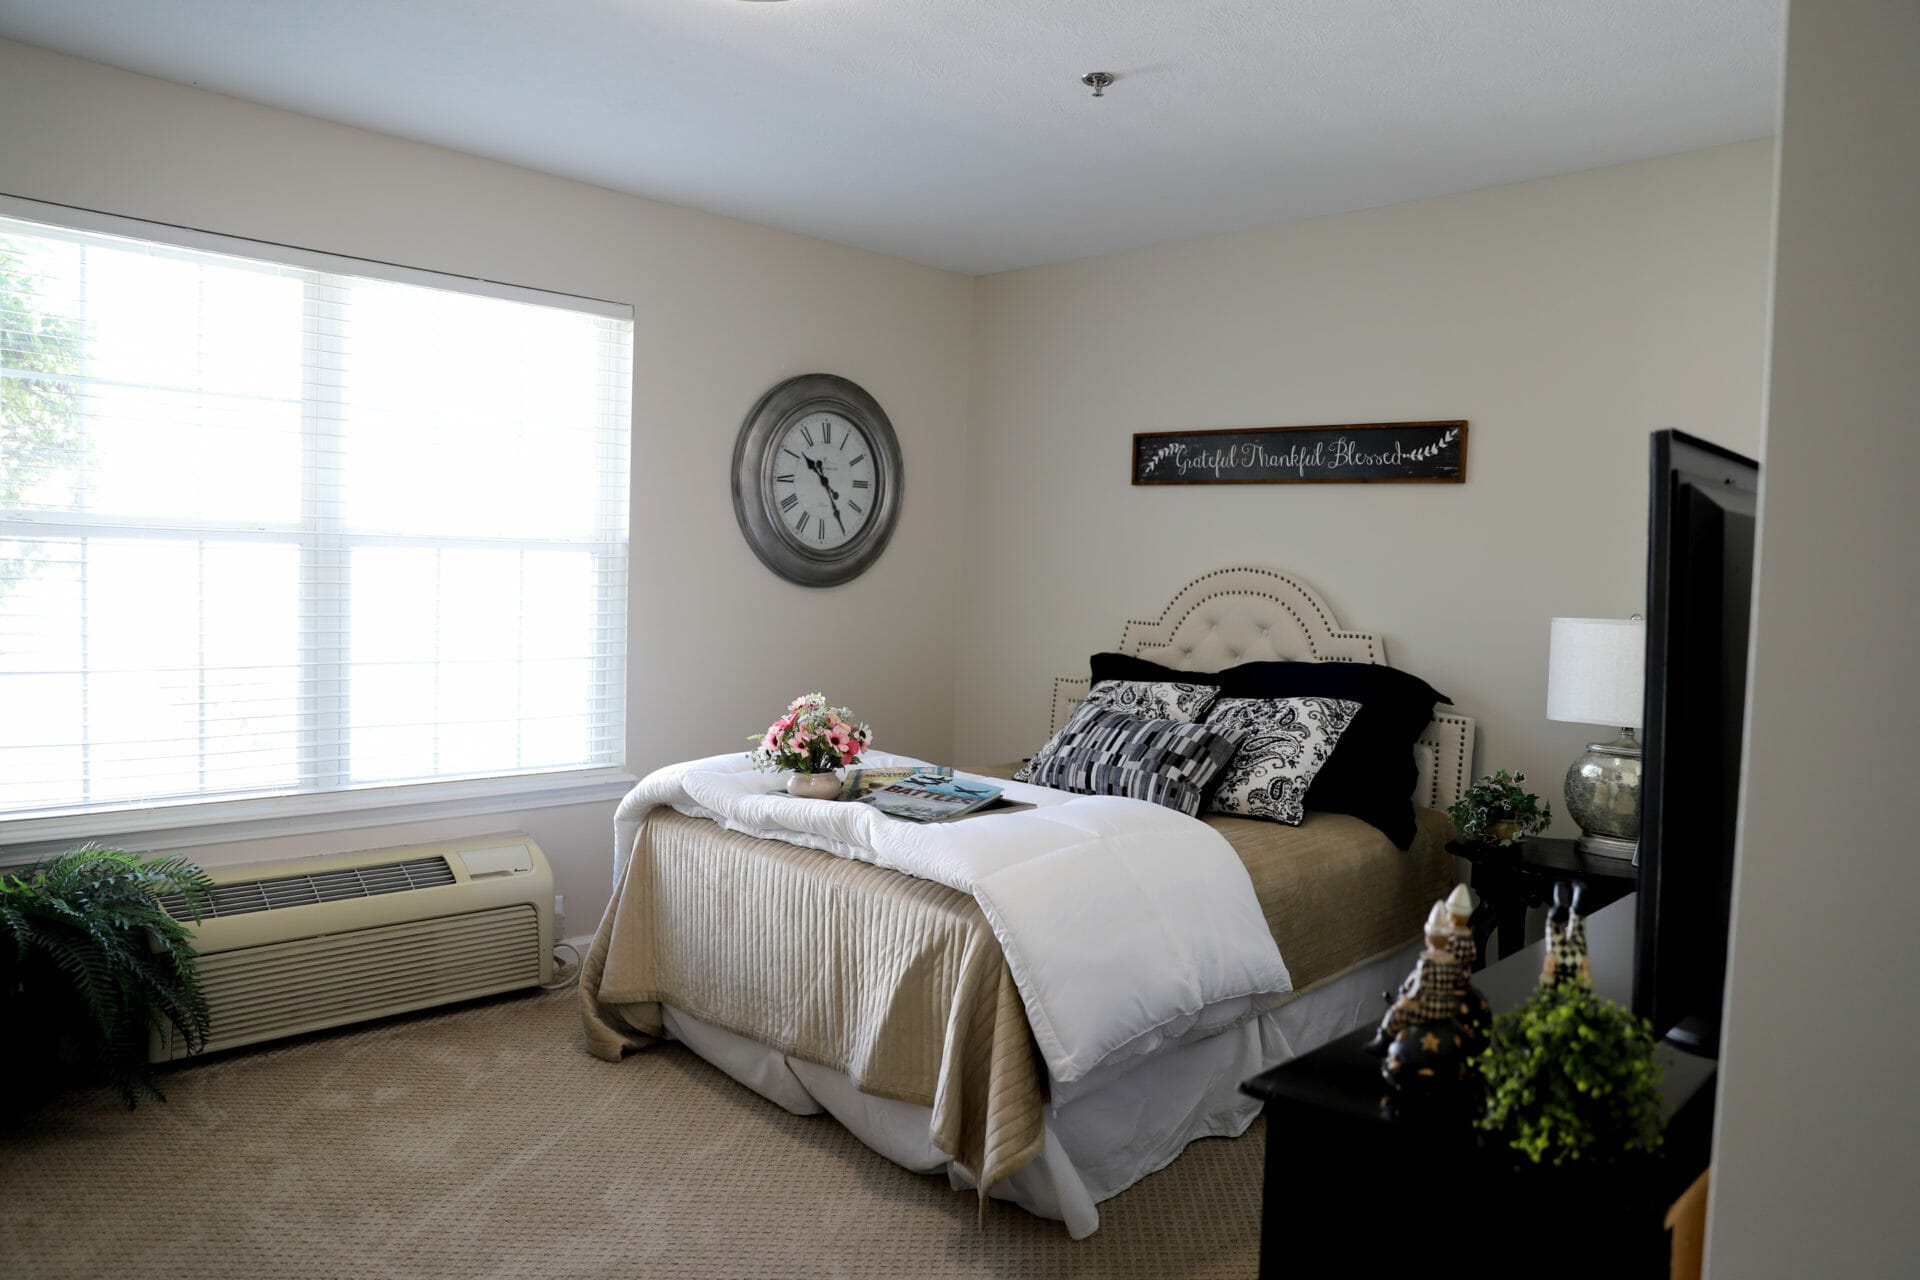 <span  class="uc_style_uc_tiles_grid_image_elementor_uc_items_attribute_title" style="color:#000000;">Bedroom at Meadow Lakes Assisted Living apartments</span>